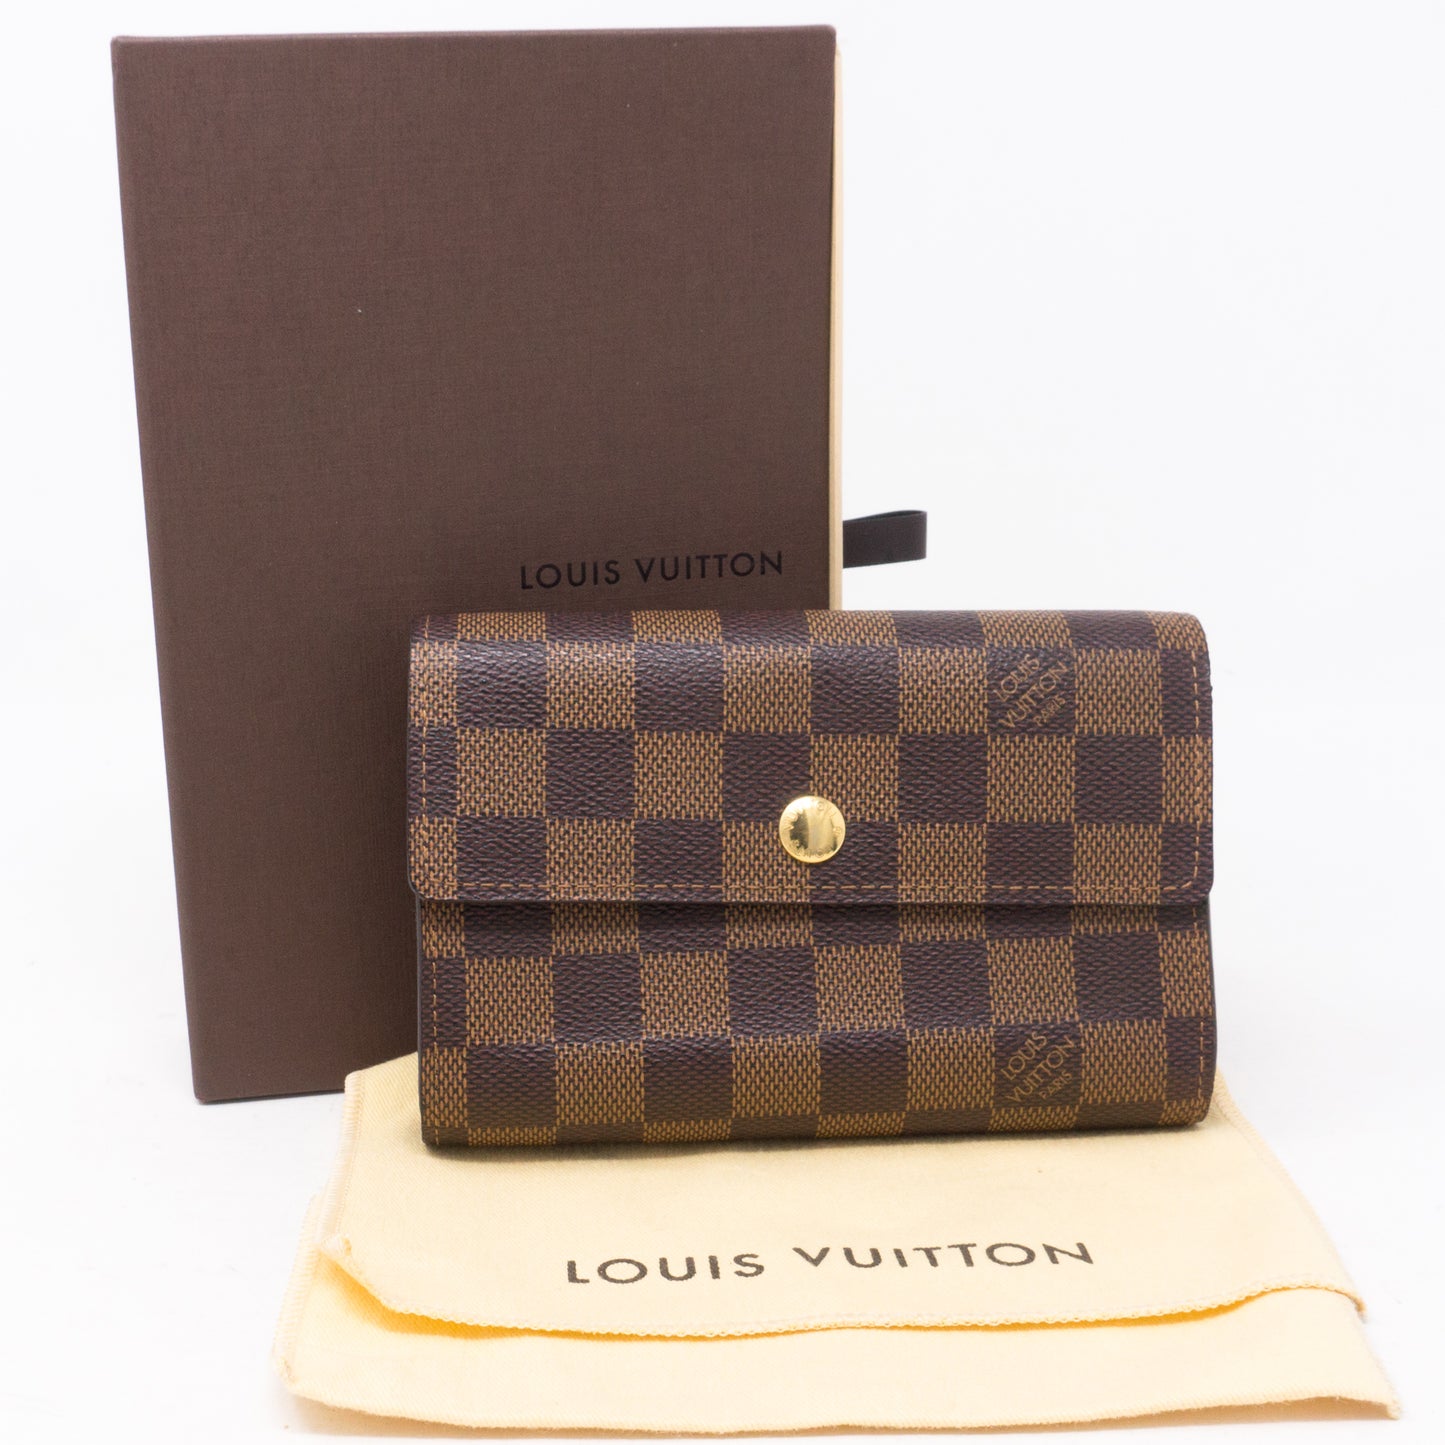 What's in My Wallet: A Review of Louis Vuitton Alexandra Wallet